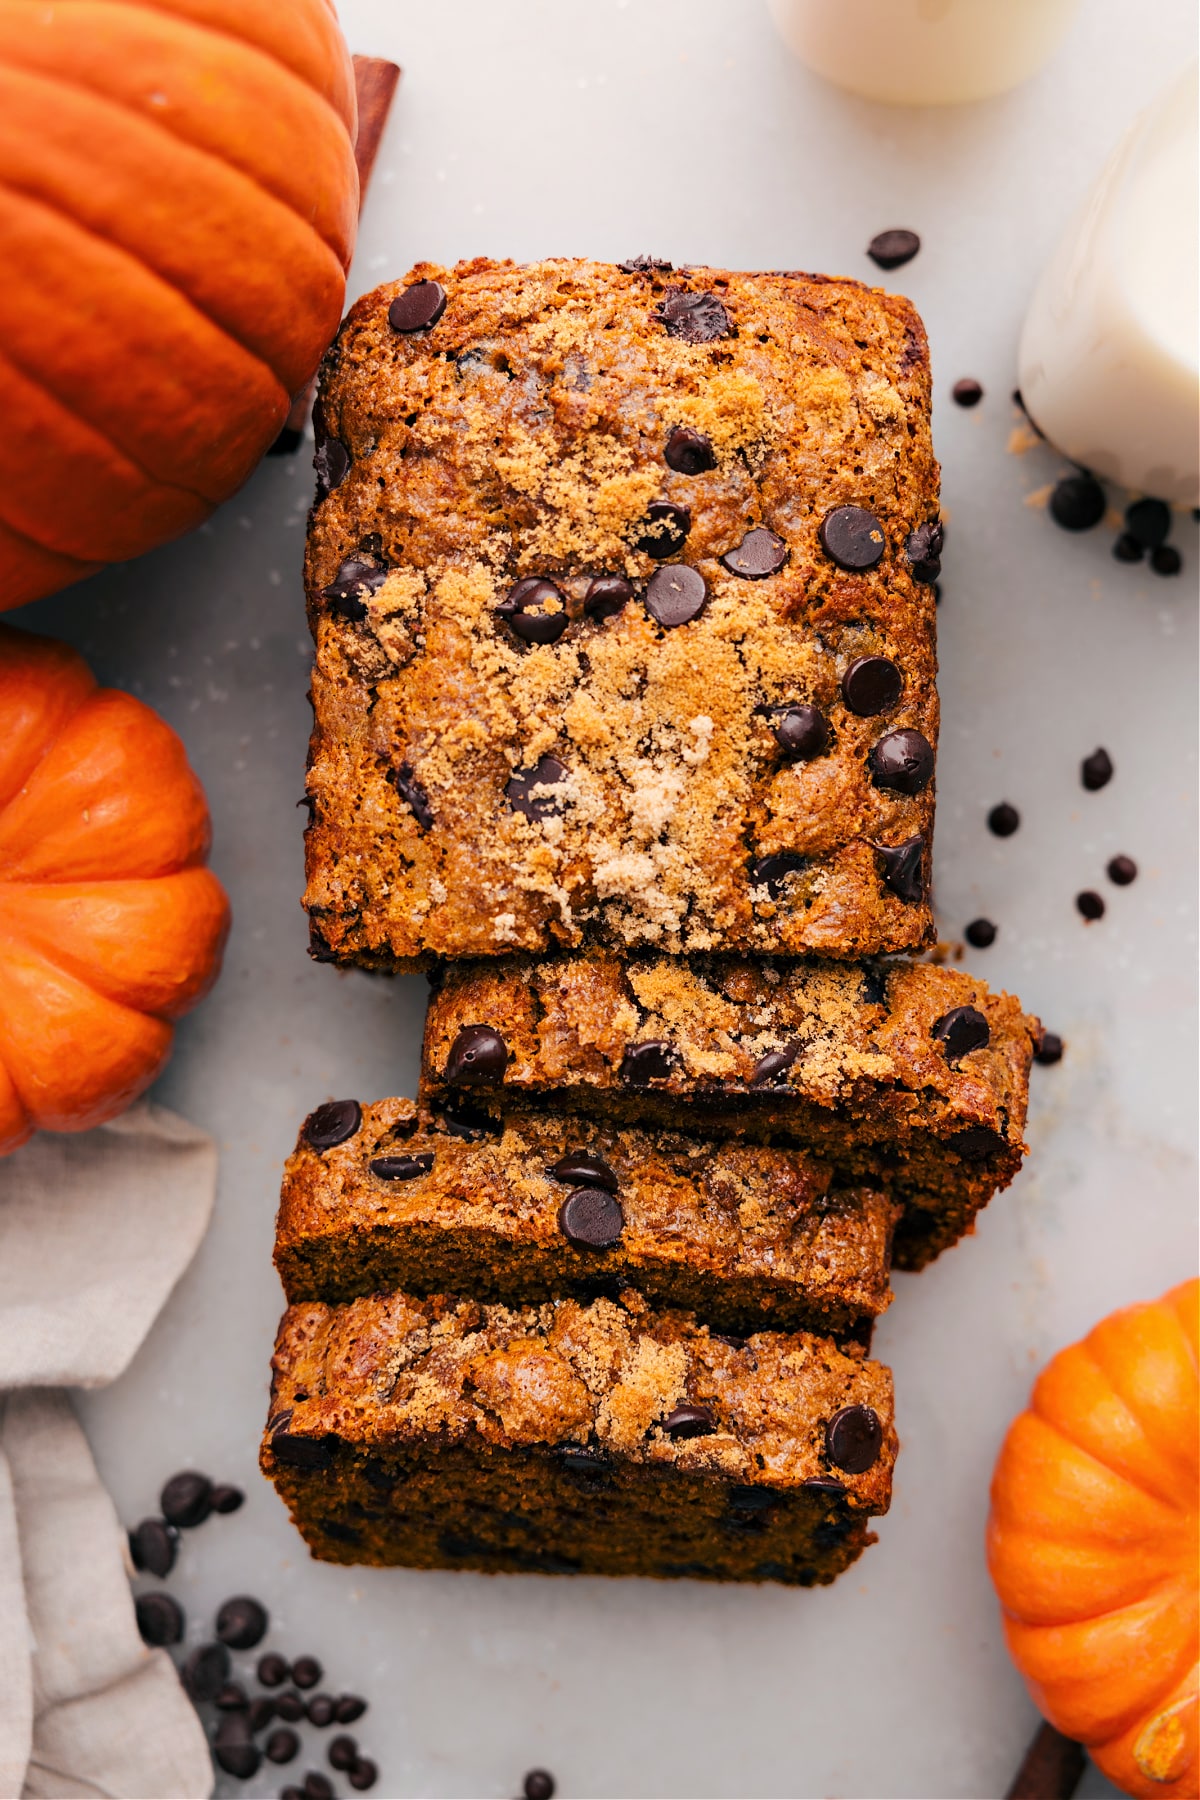 Overhead Image Of Moist and Nutritious Pumpkin Bread Slice